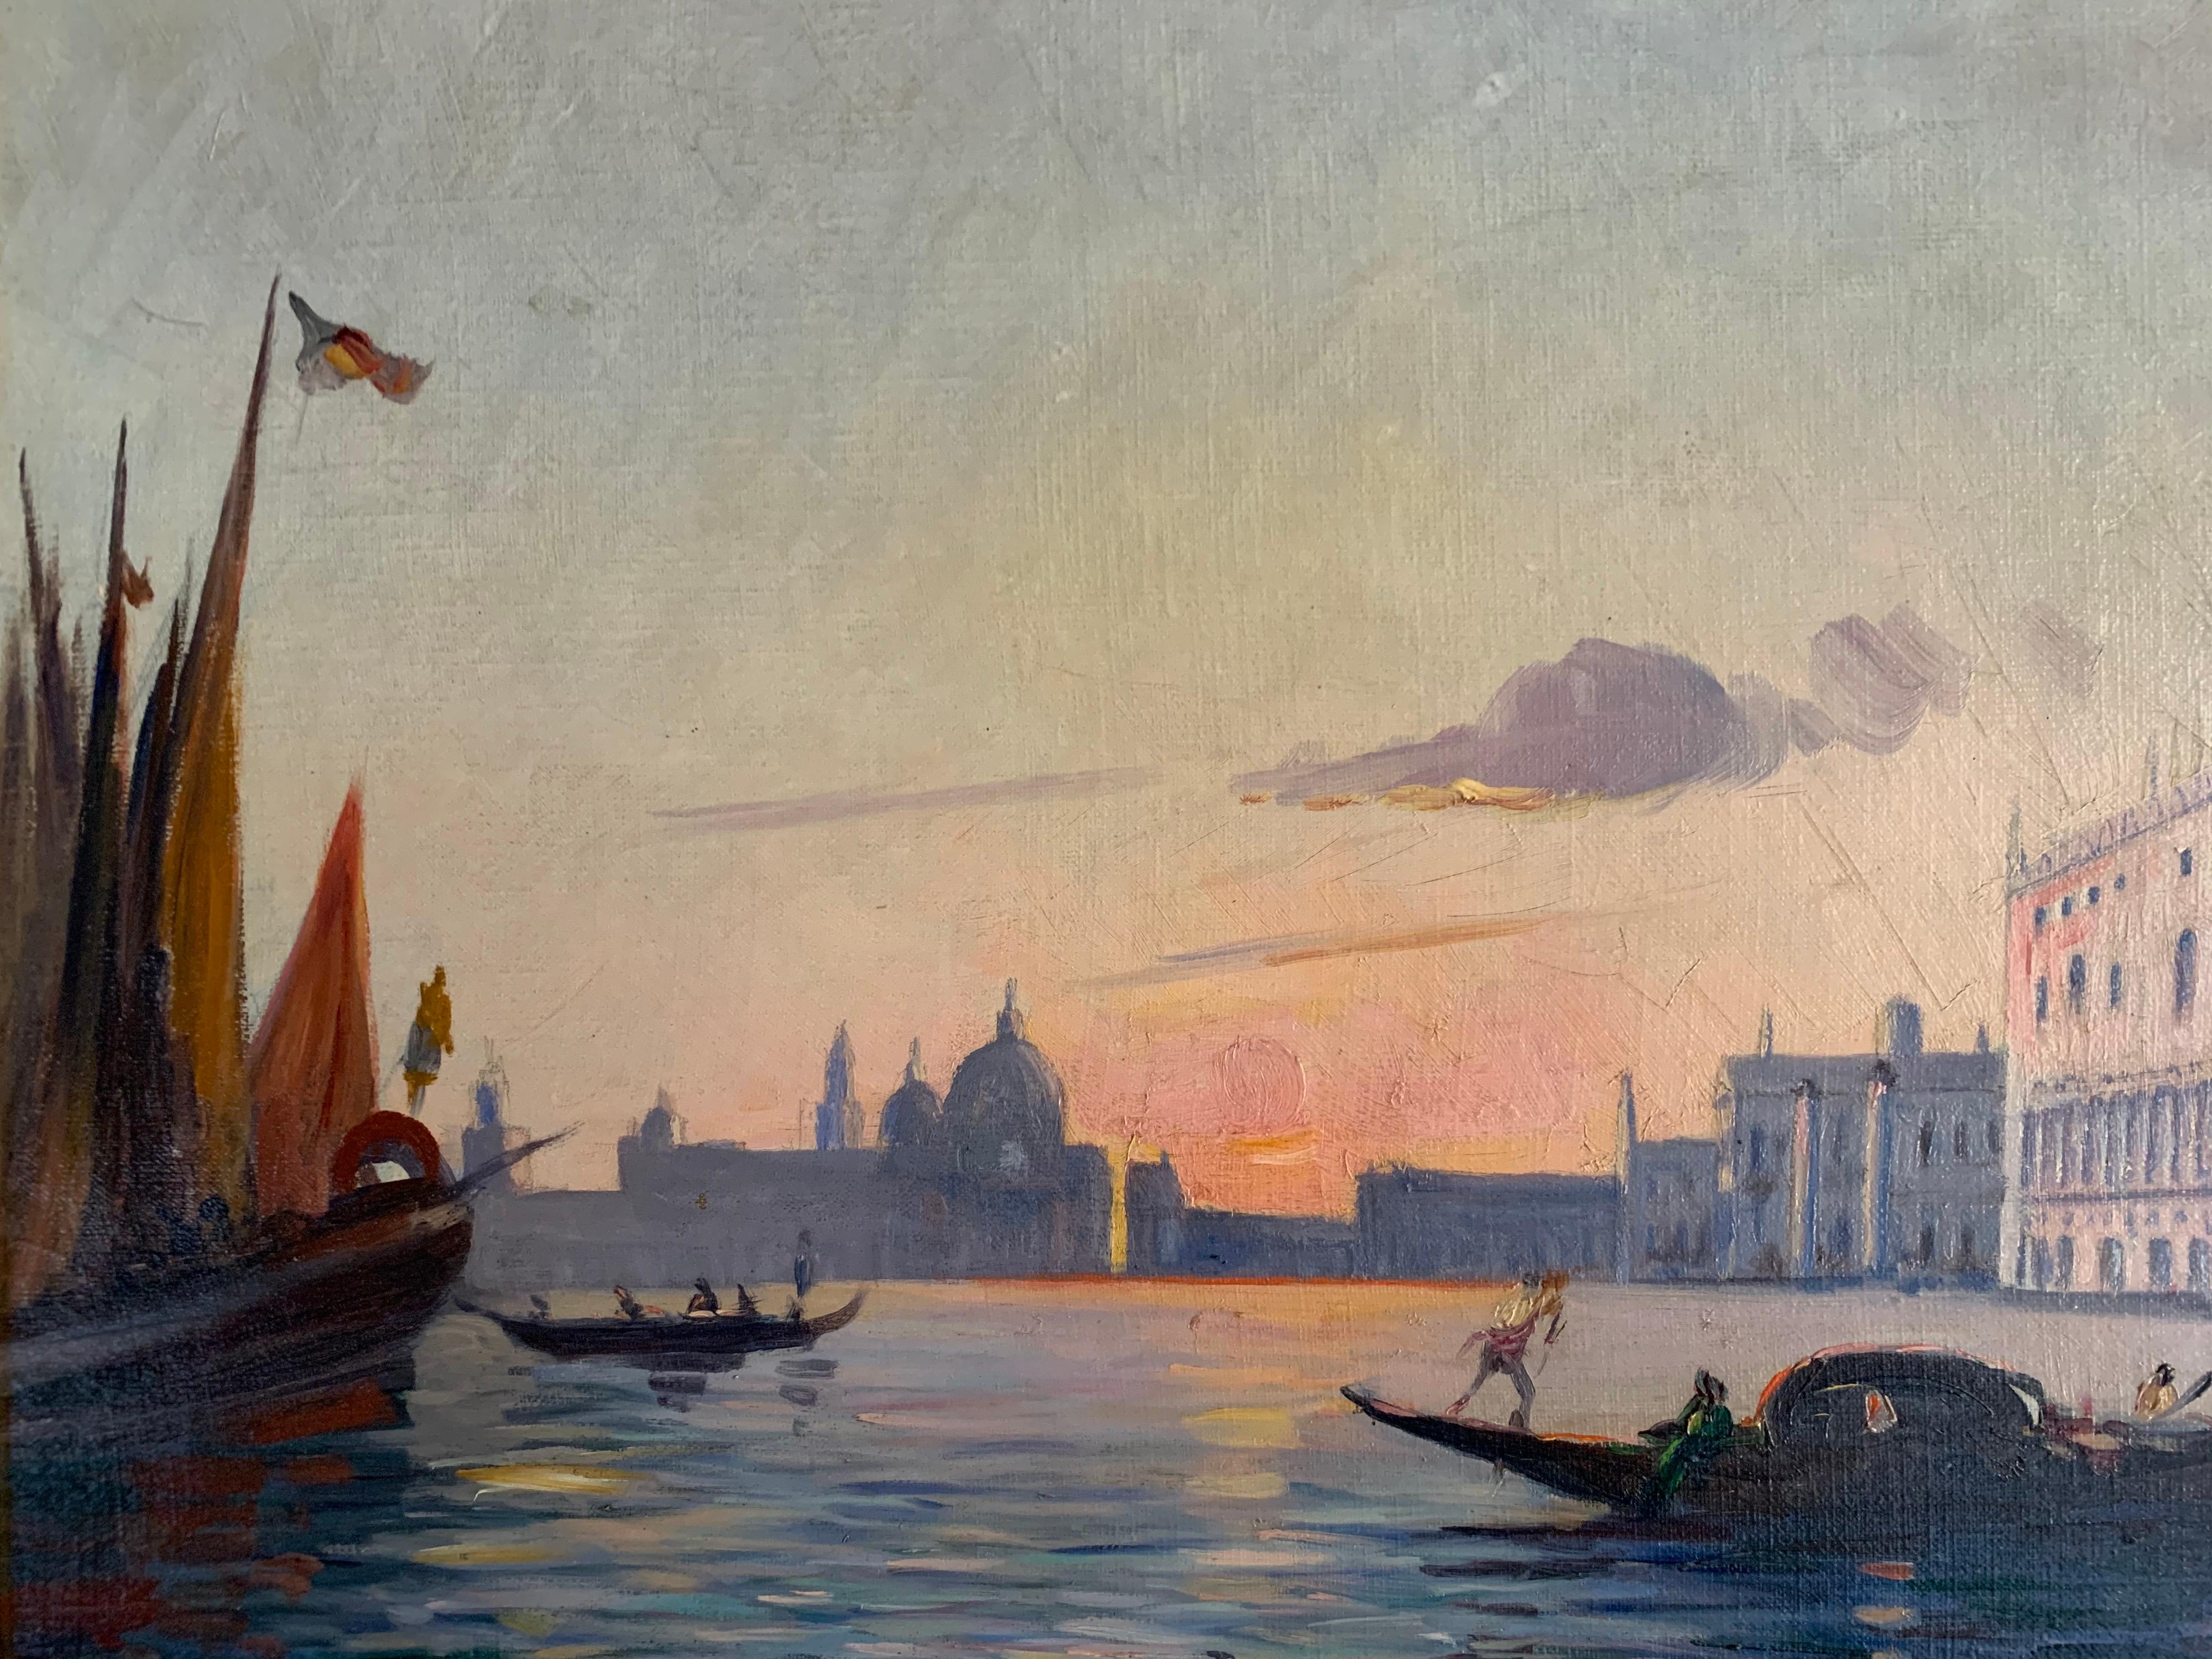 Late 19th Century Oil Painting - Sunset over Grand Canal Venice, Gondoliers - Brown Figurative Painting by Unknown